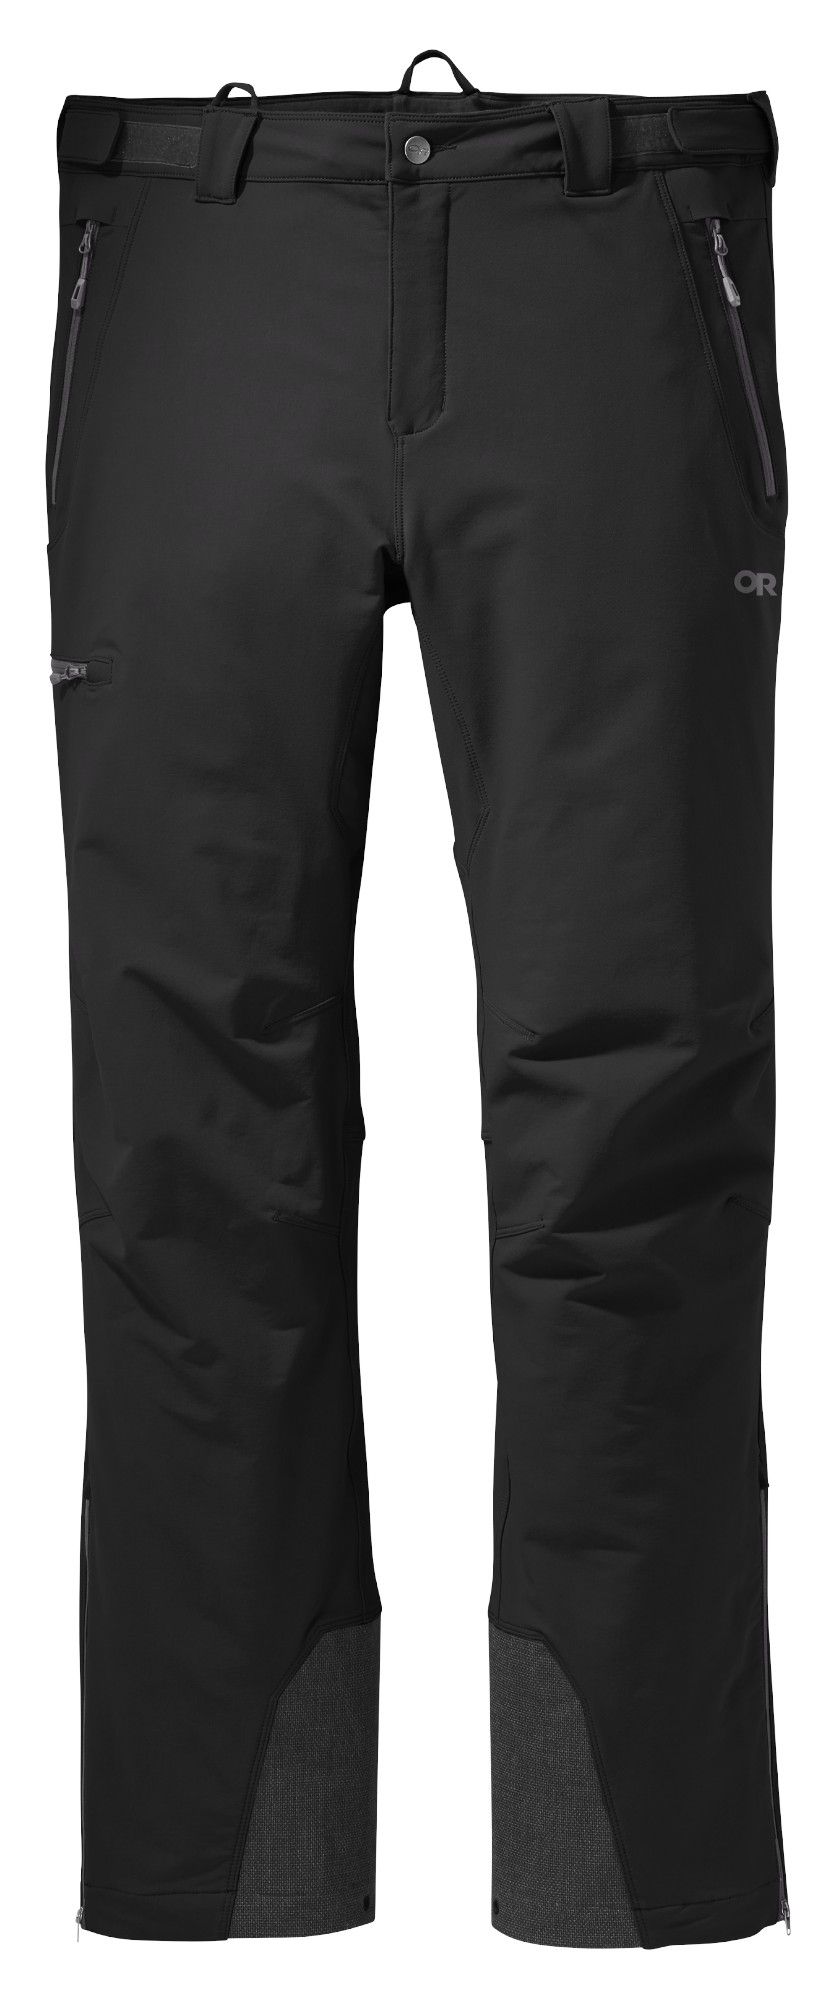 Photos - Ski Wear Outdoor Research Men's Cirque II Pant, Medium, Black | Father's Day Gift I